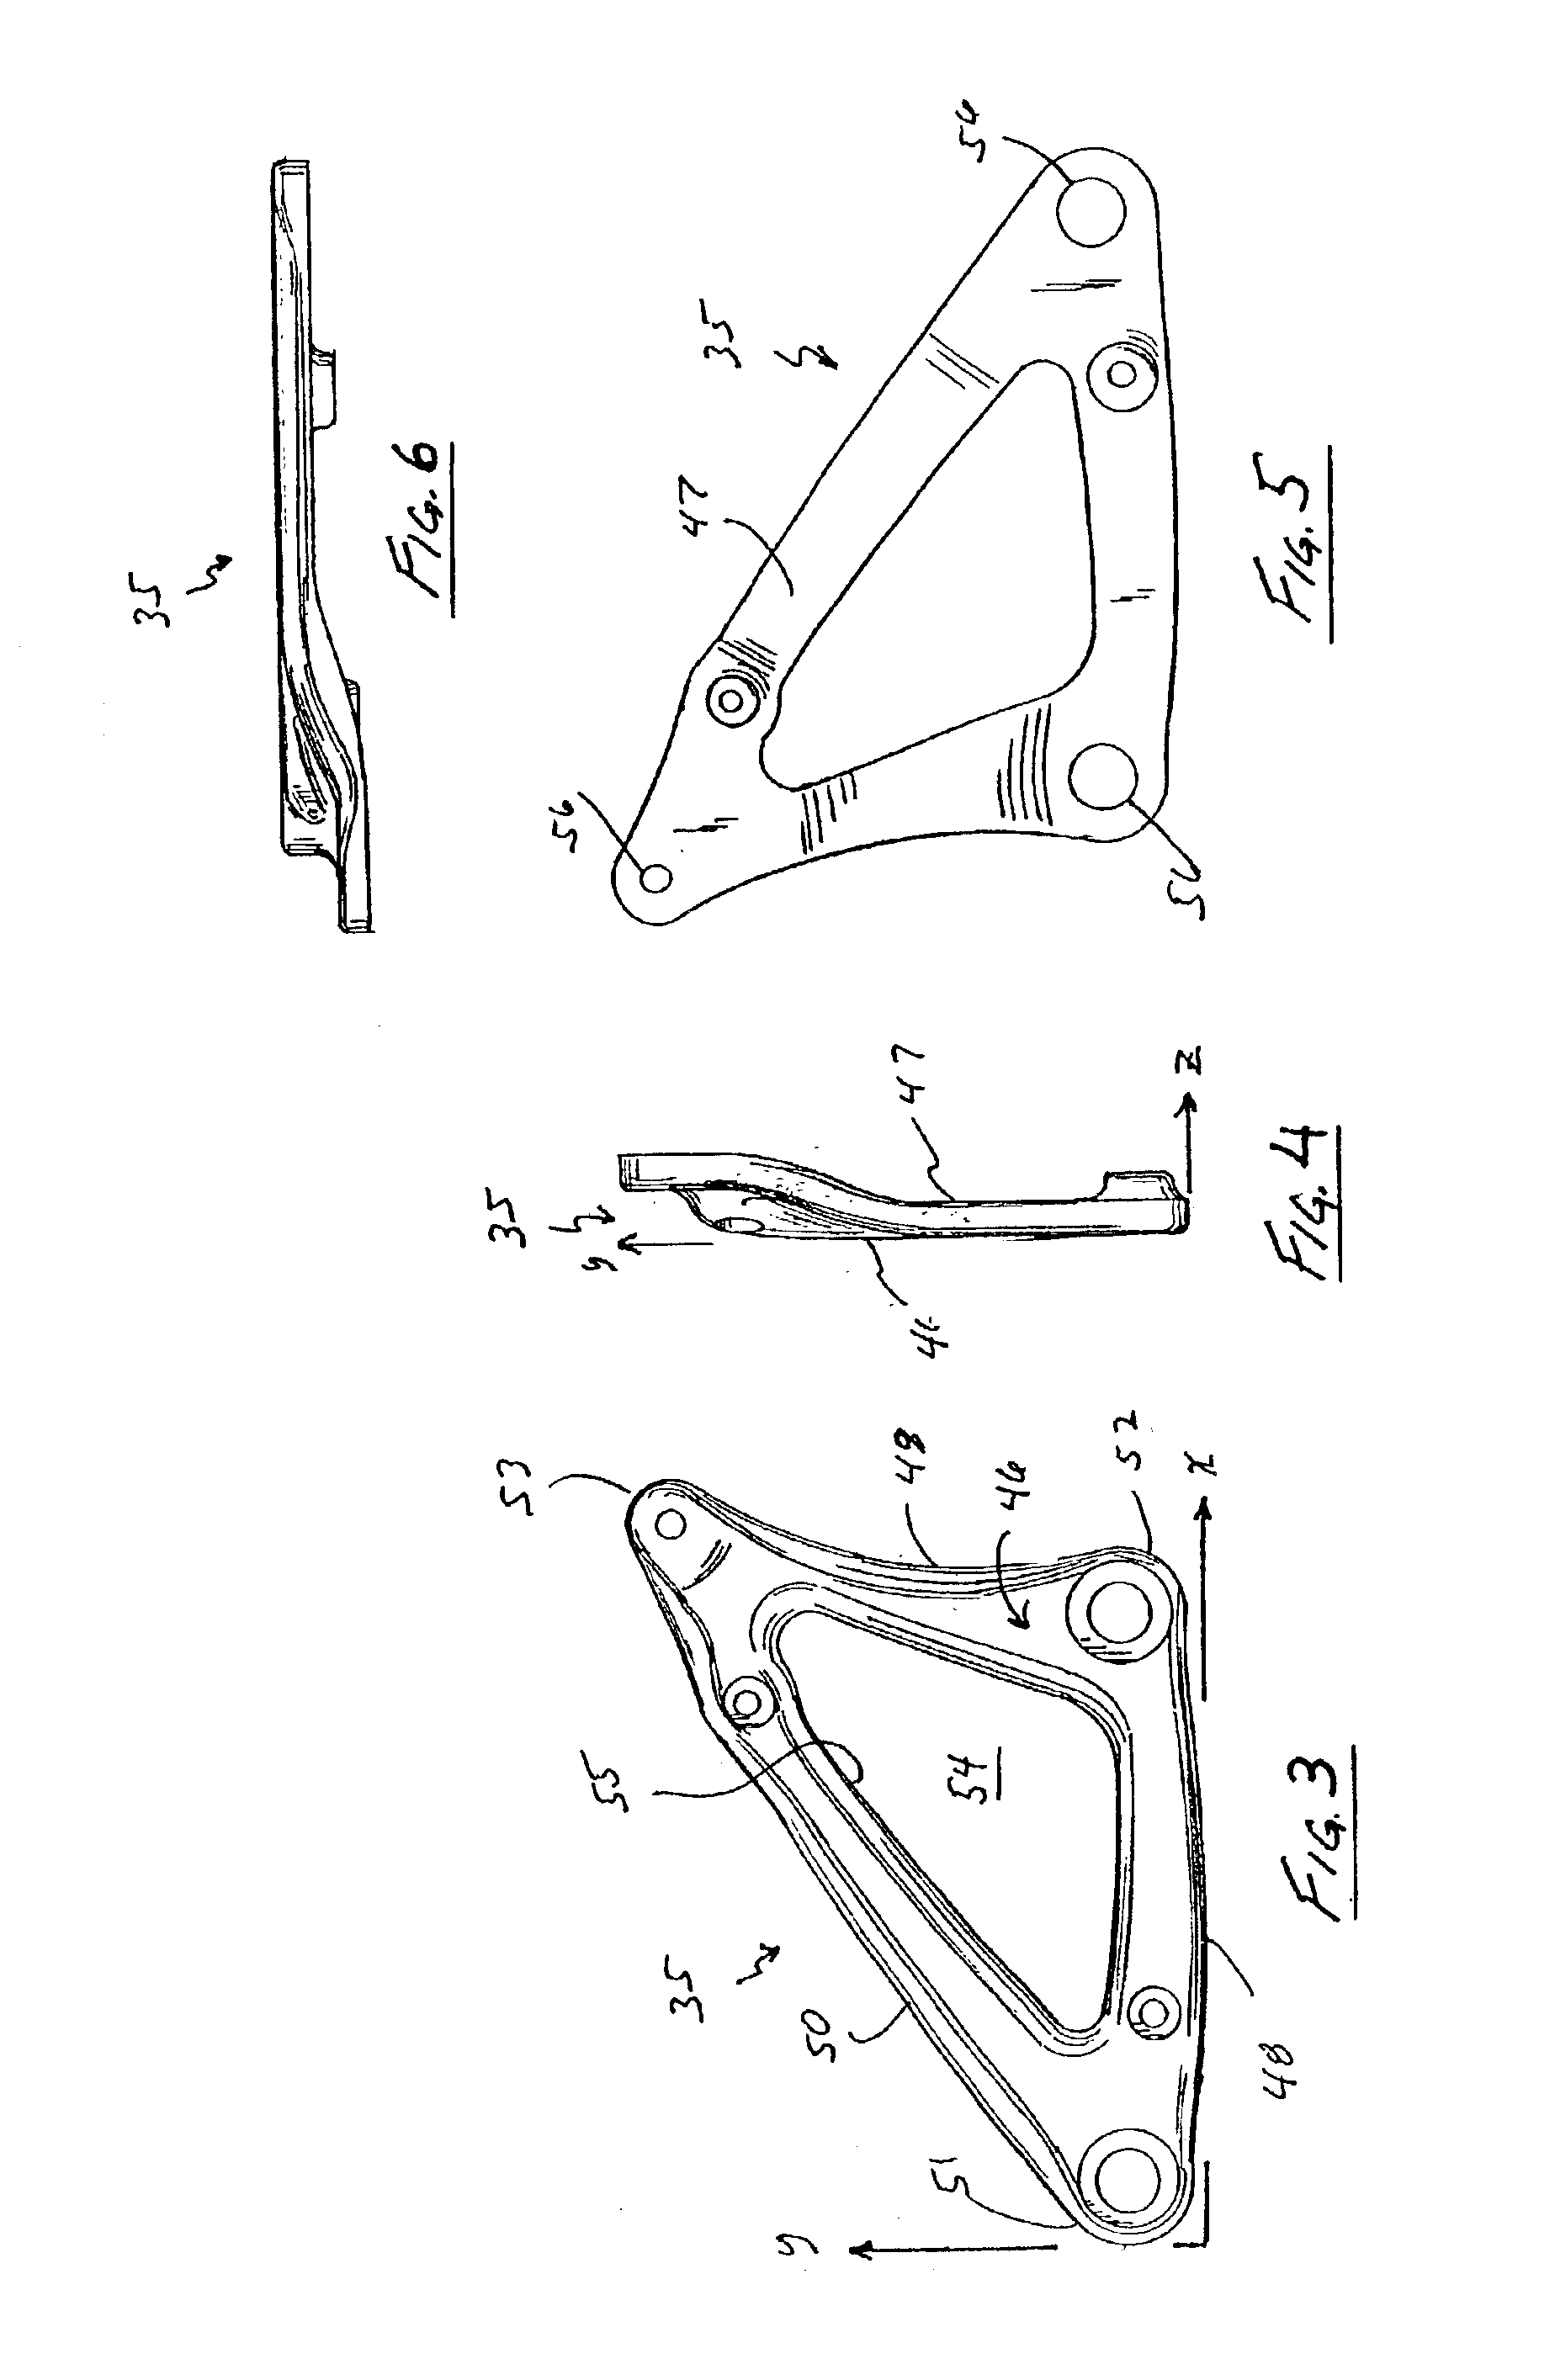 Complex-shaped carbon fiber structural member and its method of manufacture